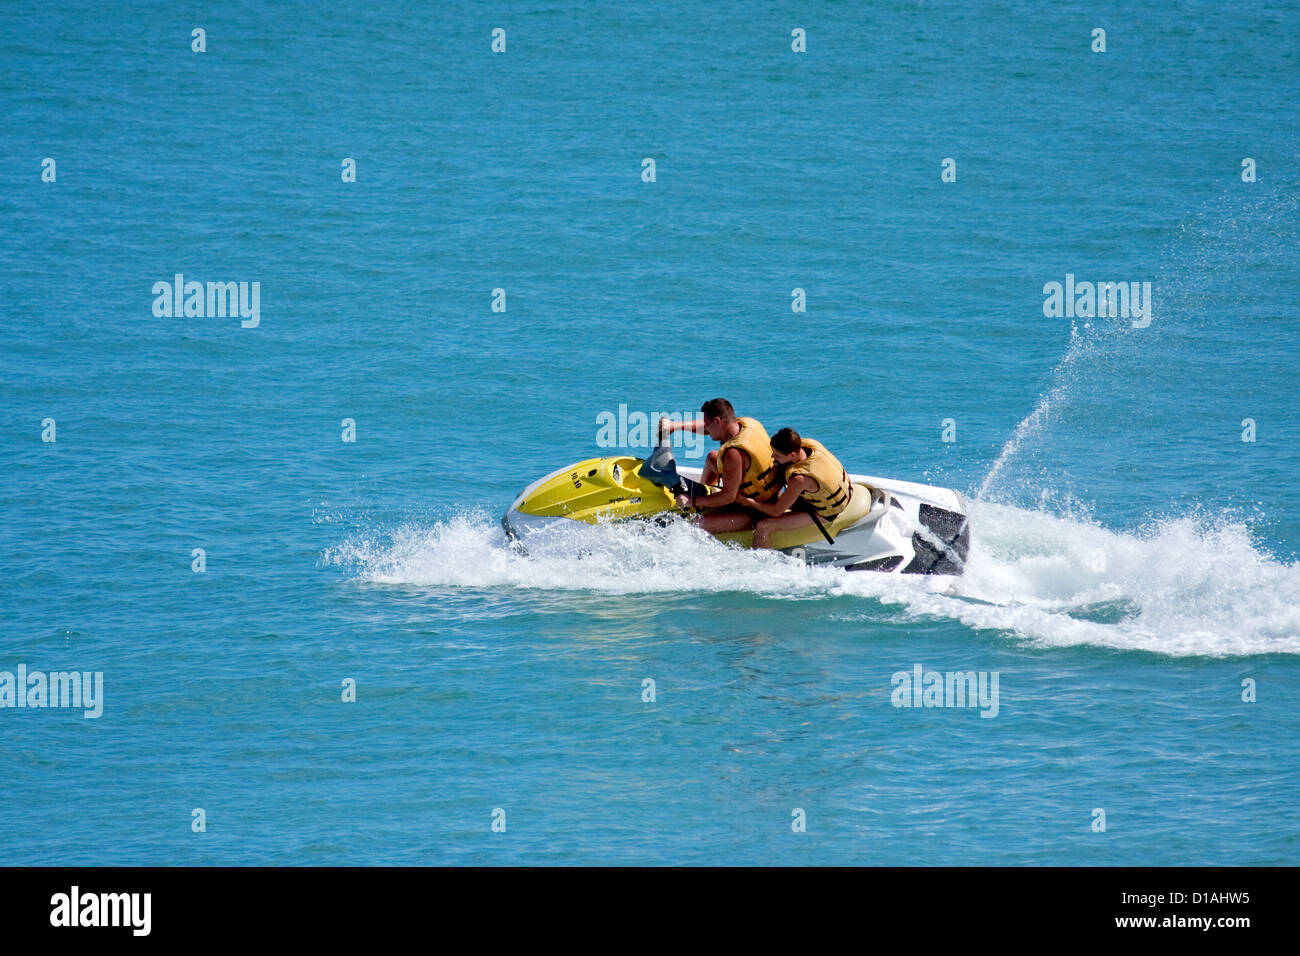 Duo jet skiing in tropical waters Stock Photo